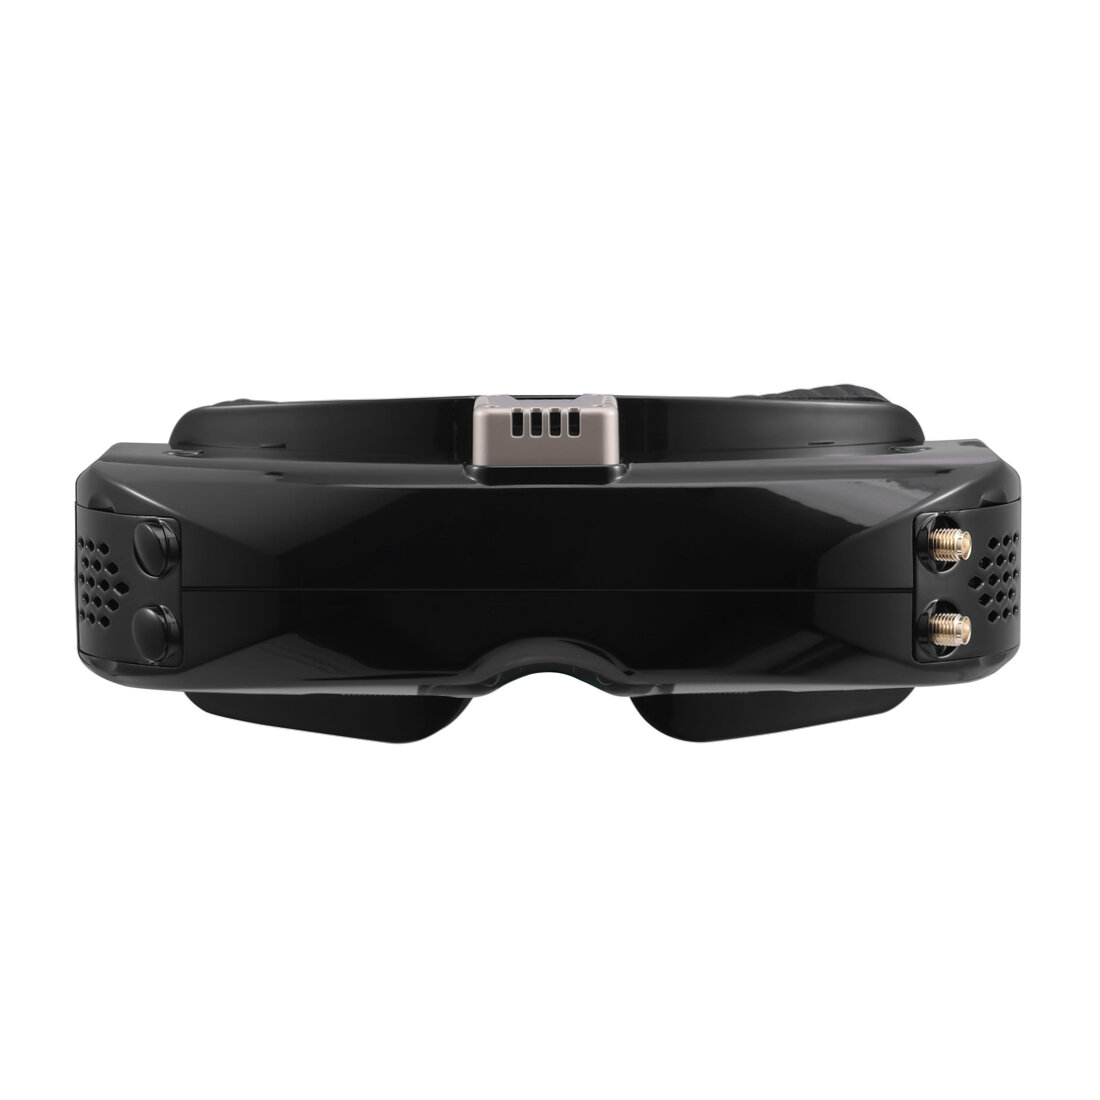 Eachine EV300O 1024x768 5.8Ghz 48CH OLED HD 3D FPV Goggles Diversity with New Rapidmix RX Receiver Built-in DVR Headtracker Focal Adjustable